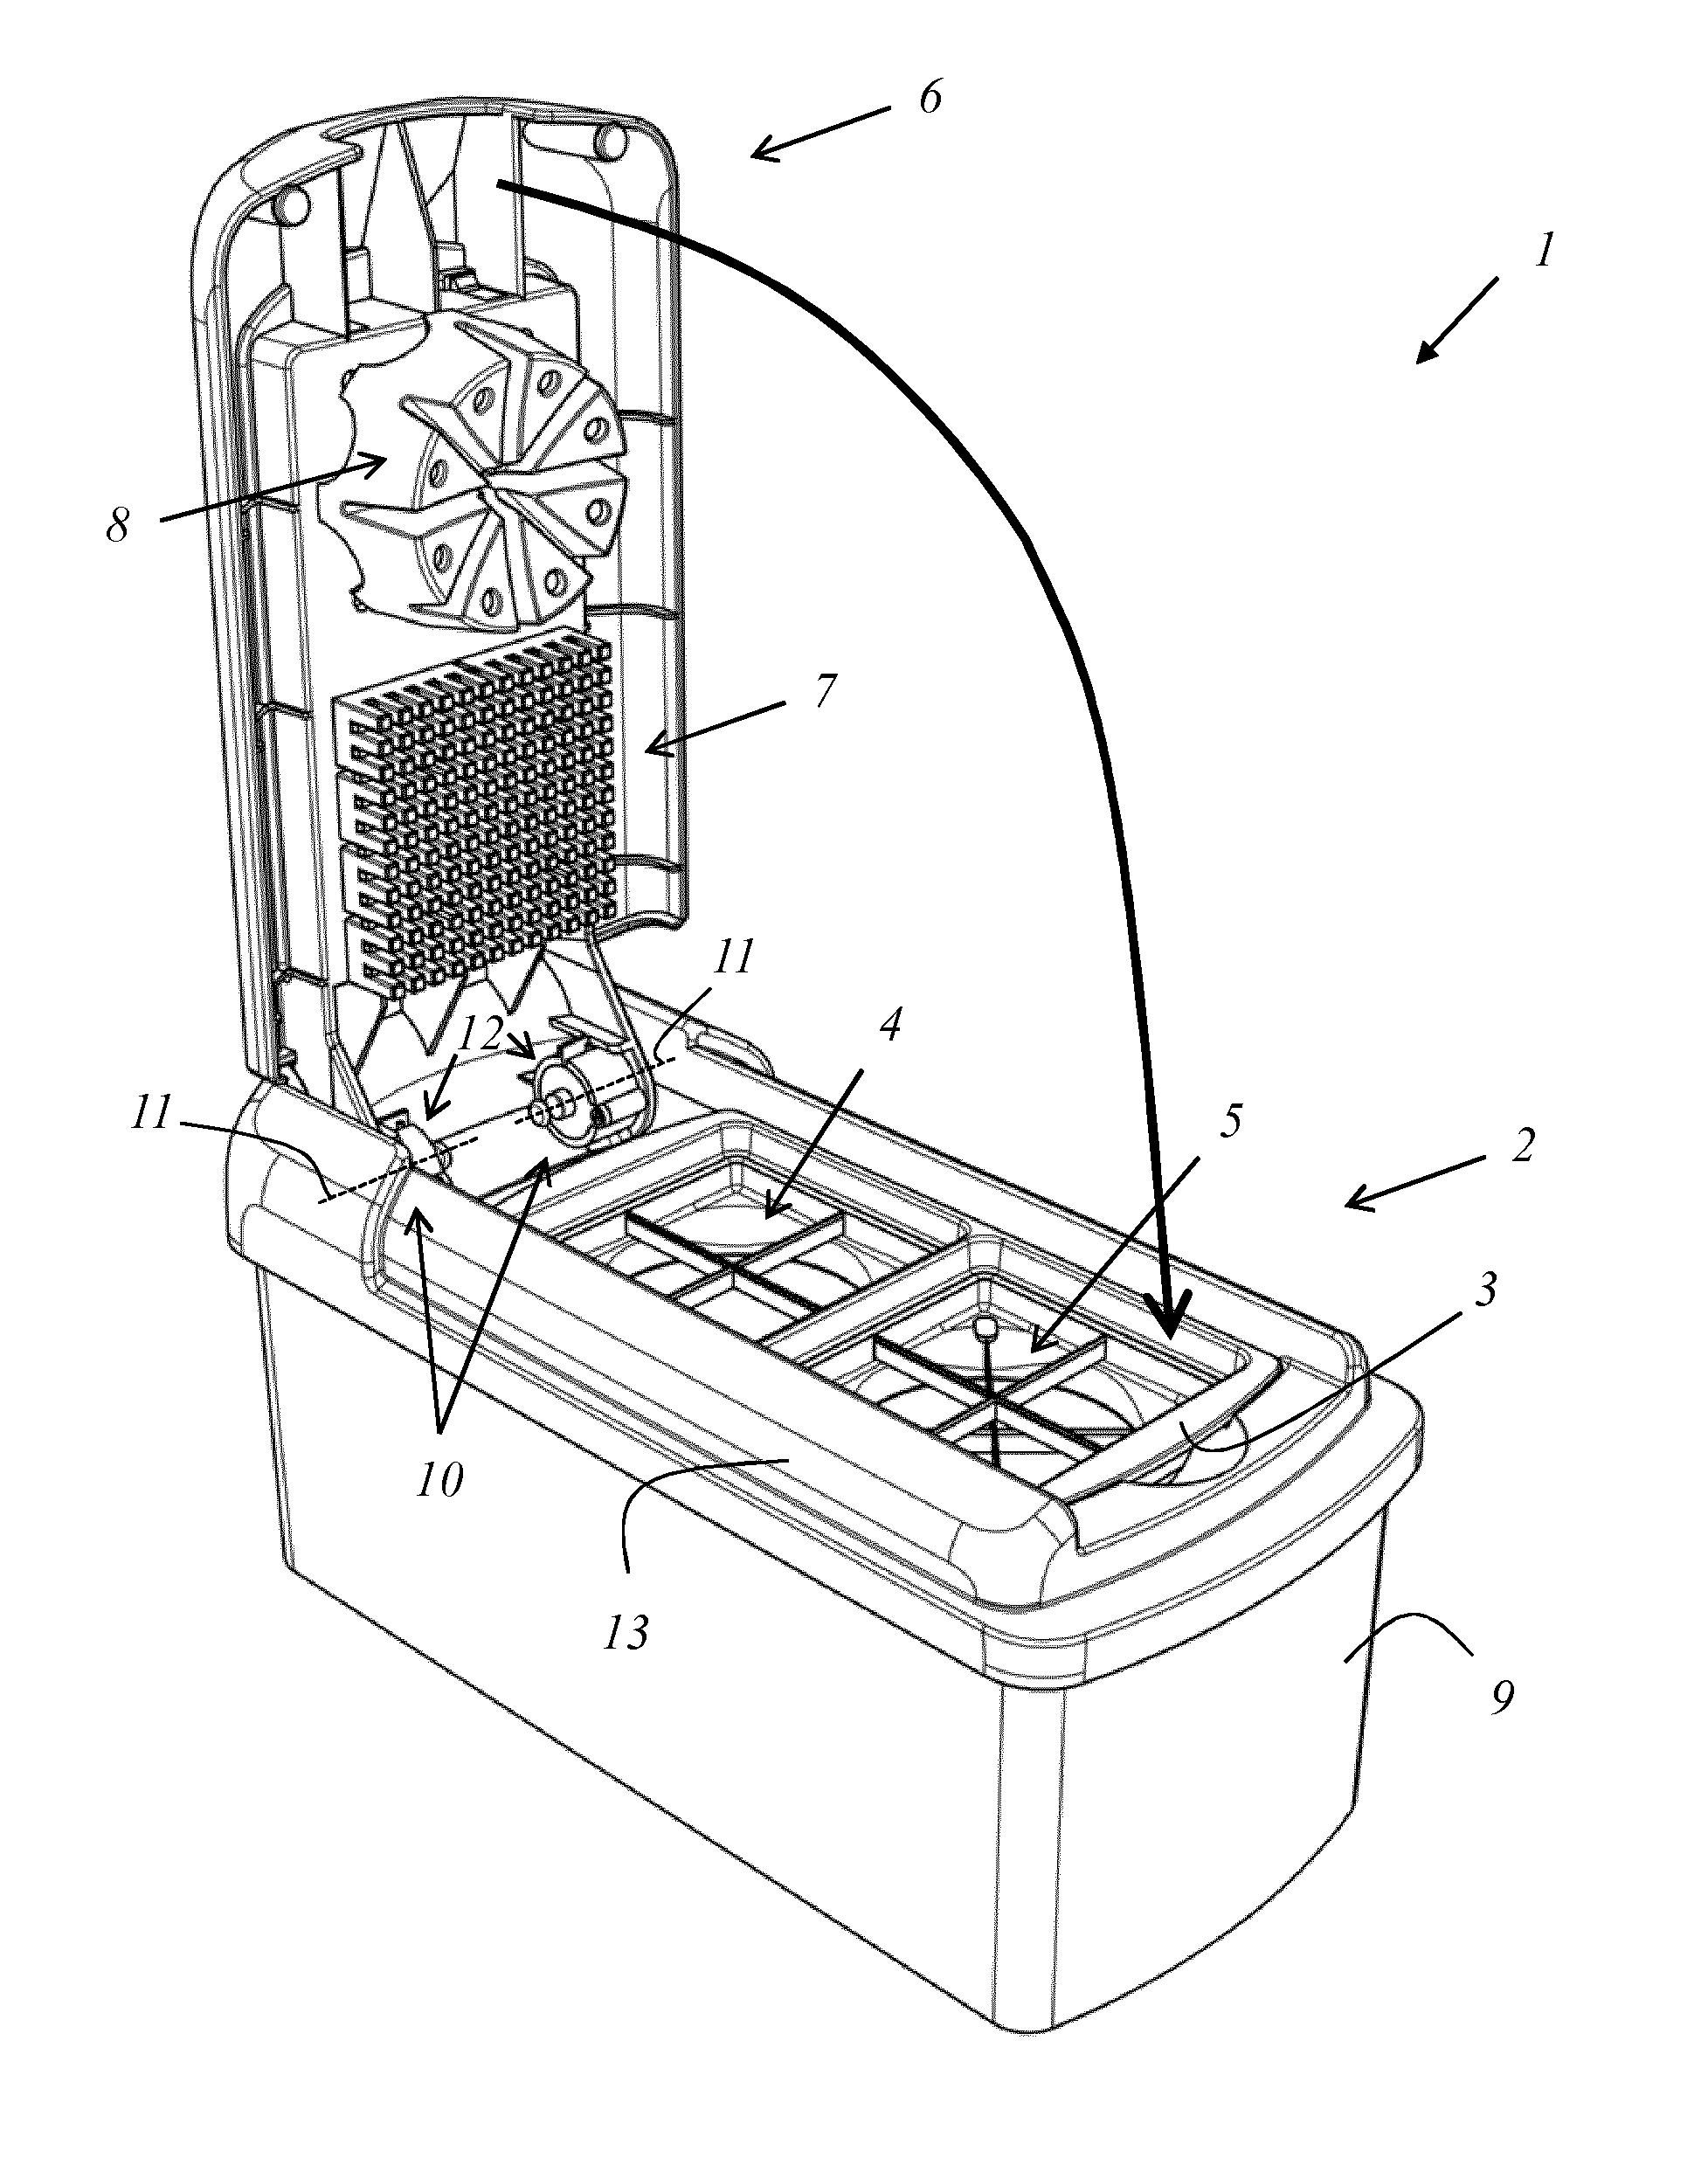 Food comminution device